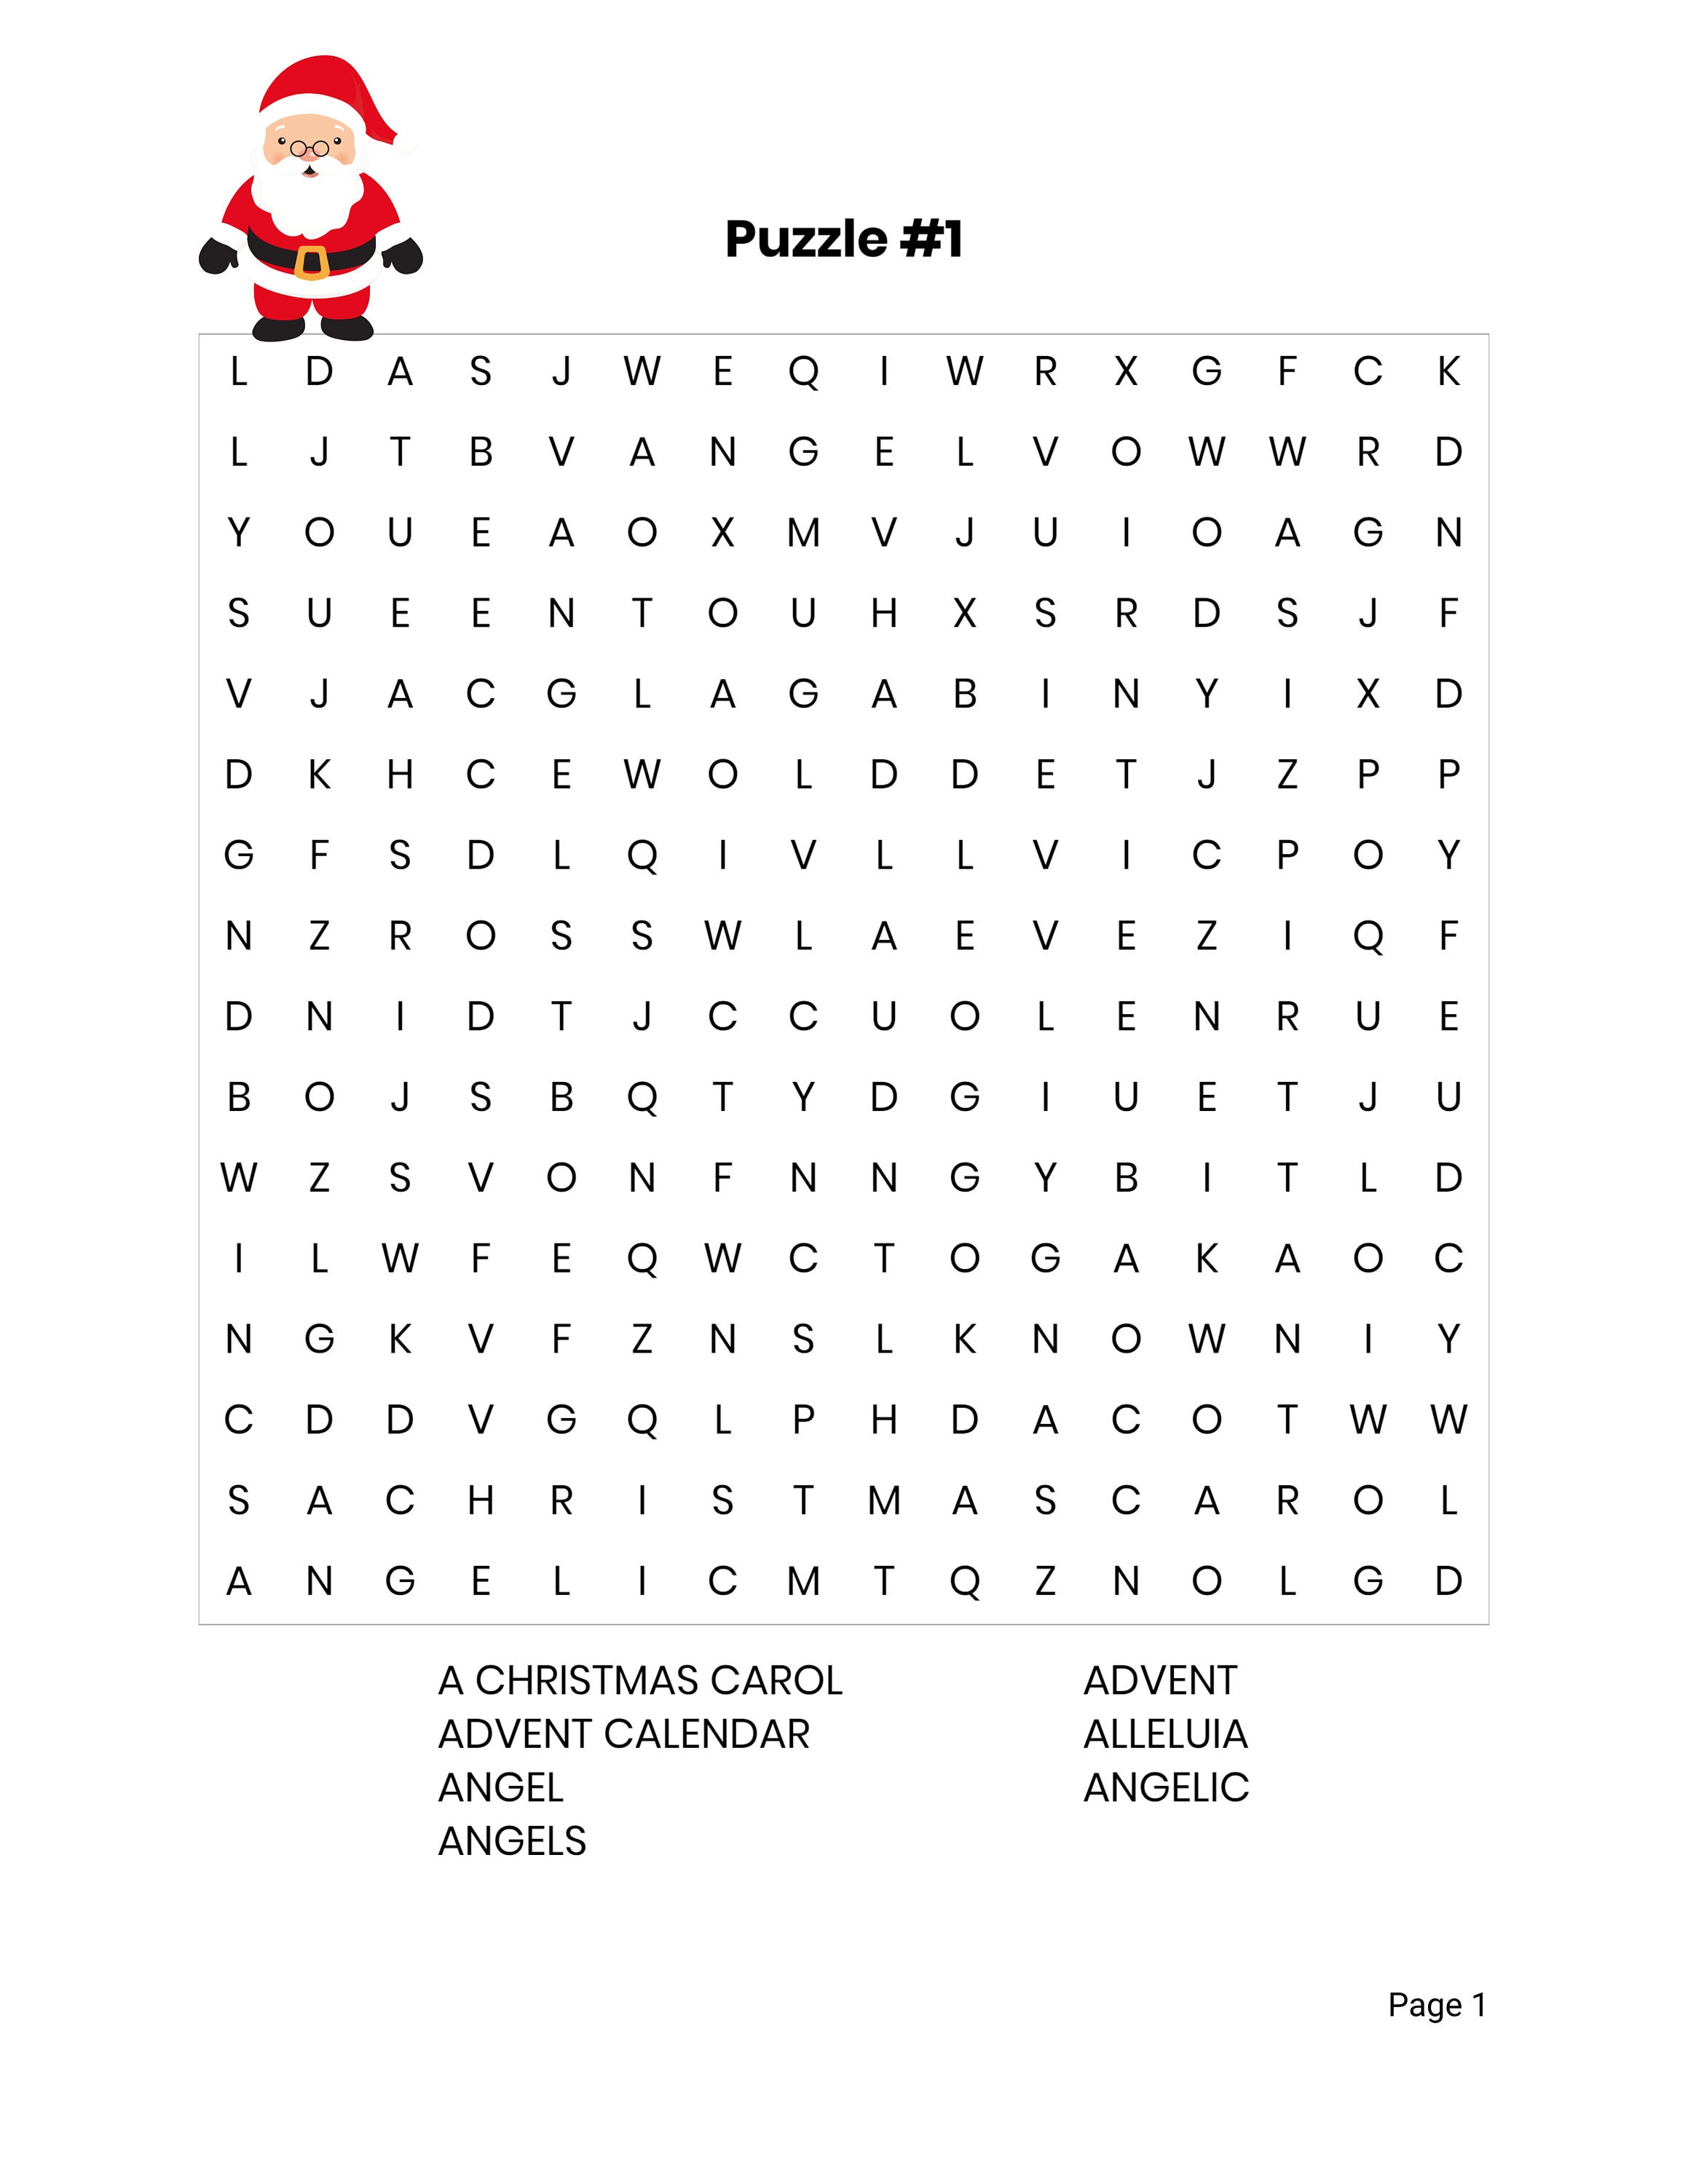 printable-word-search-puzzles-printable-christmas-word-search-puzzles